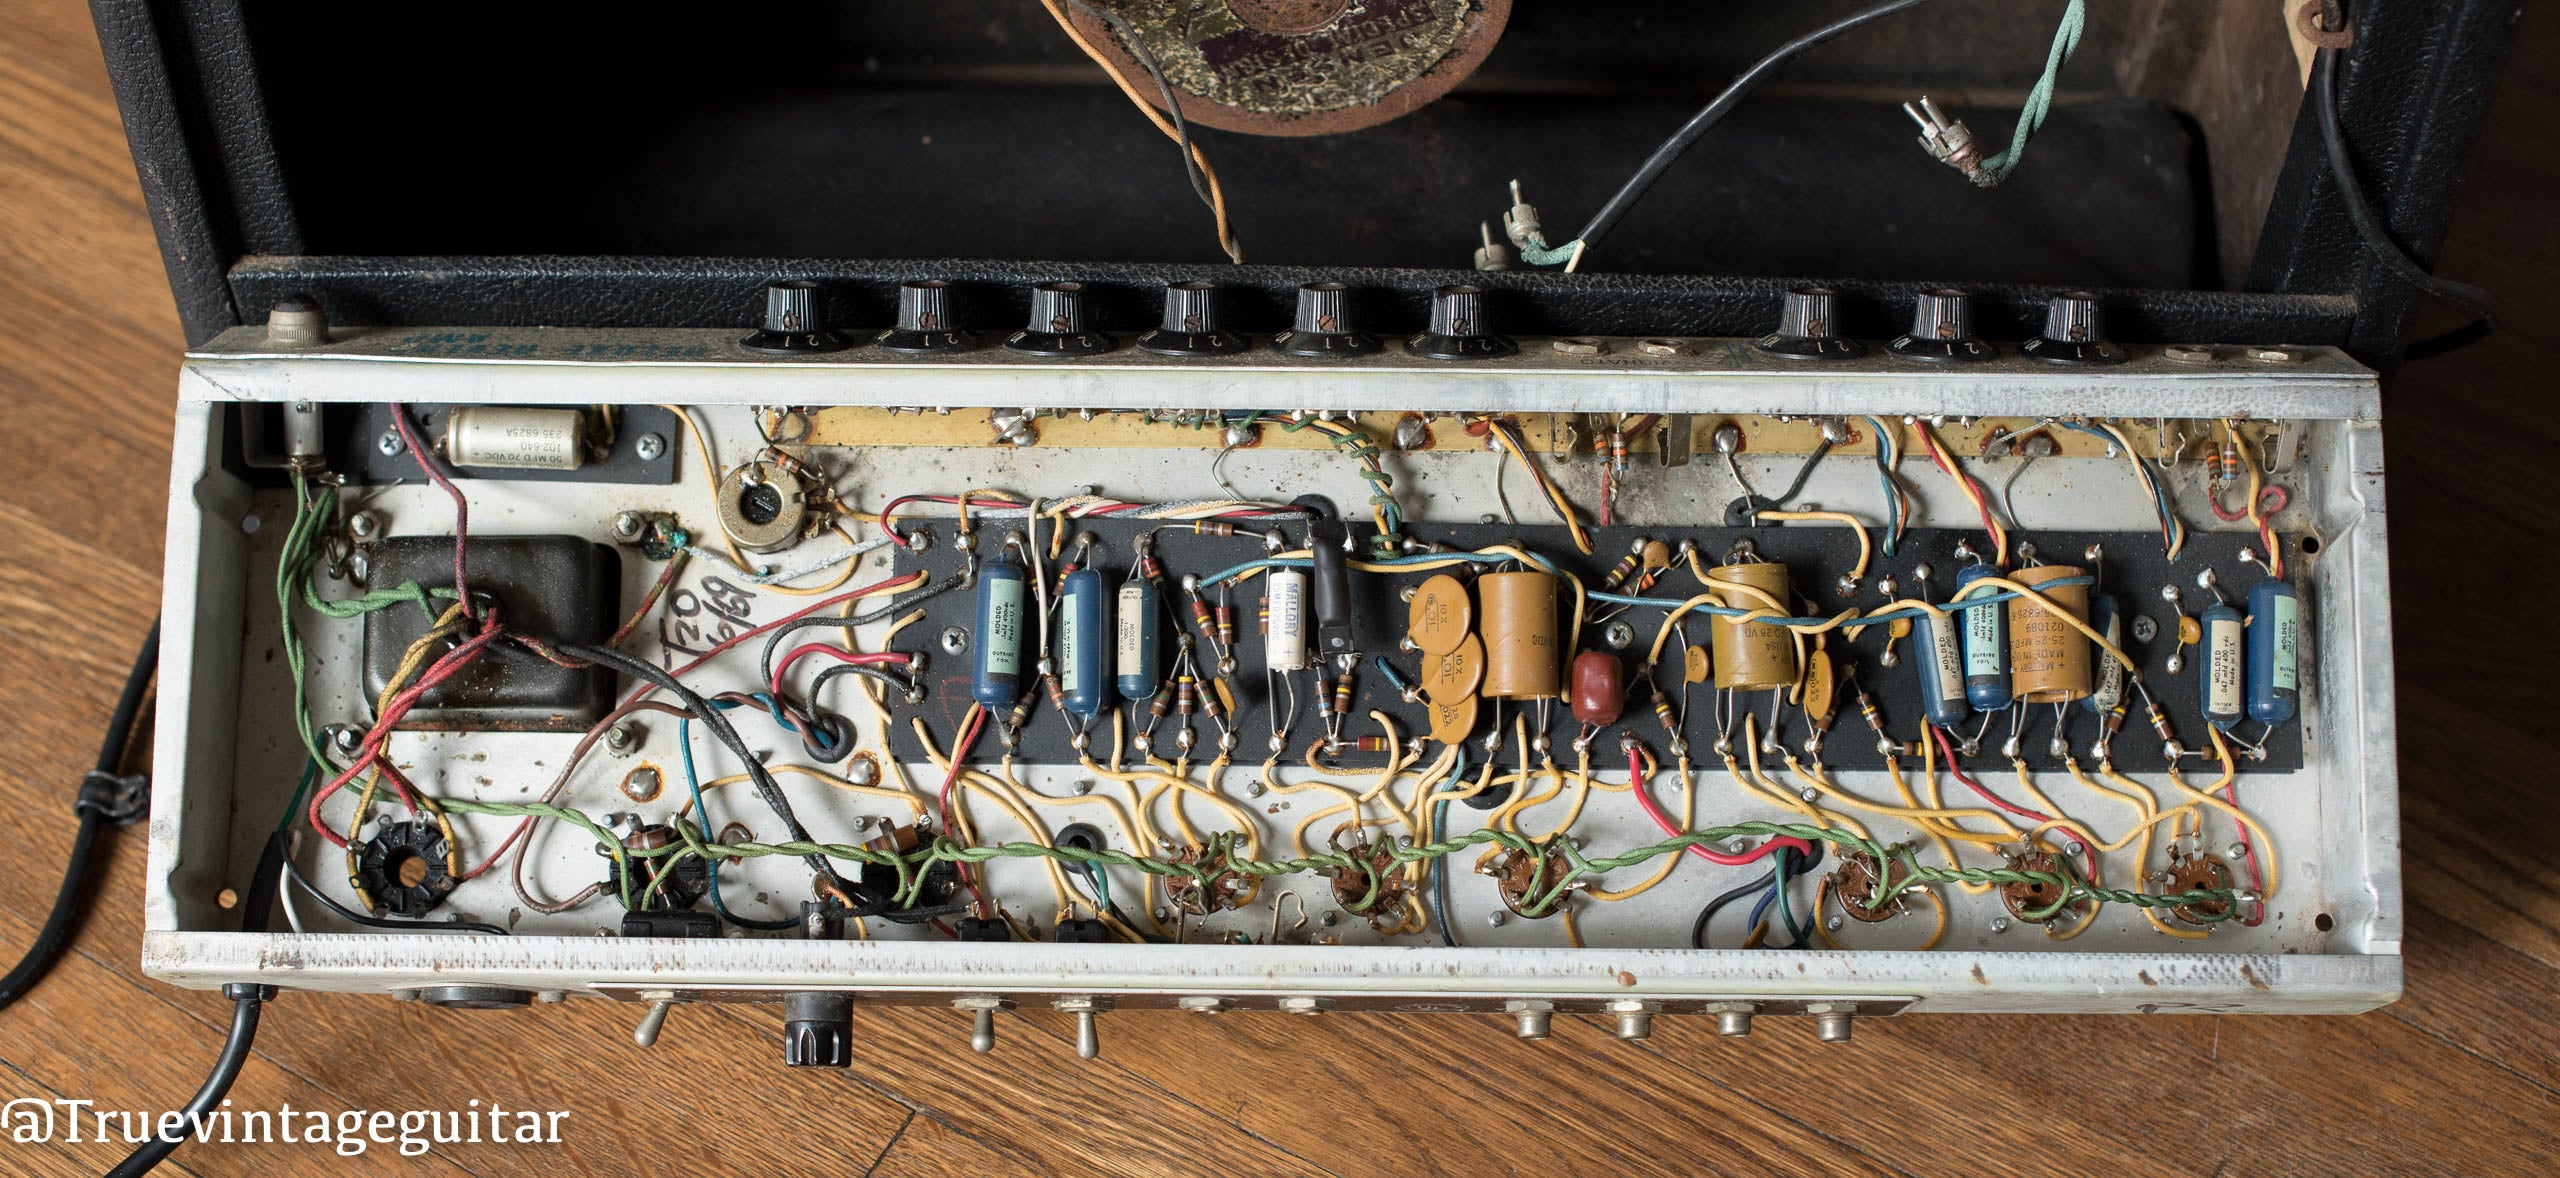 Fender chassis, circuit board, 1969 Deluxe Reverb